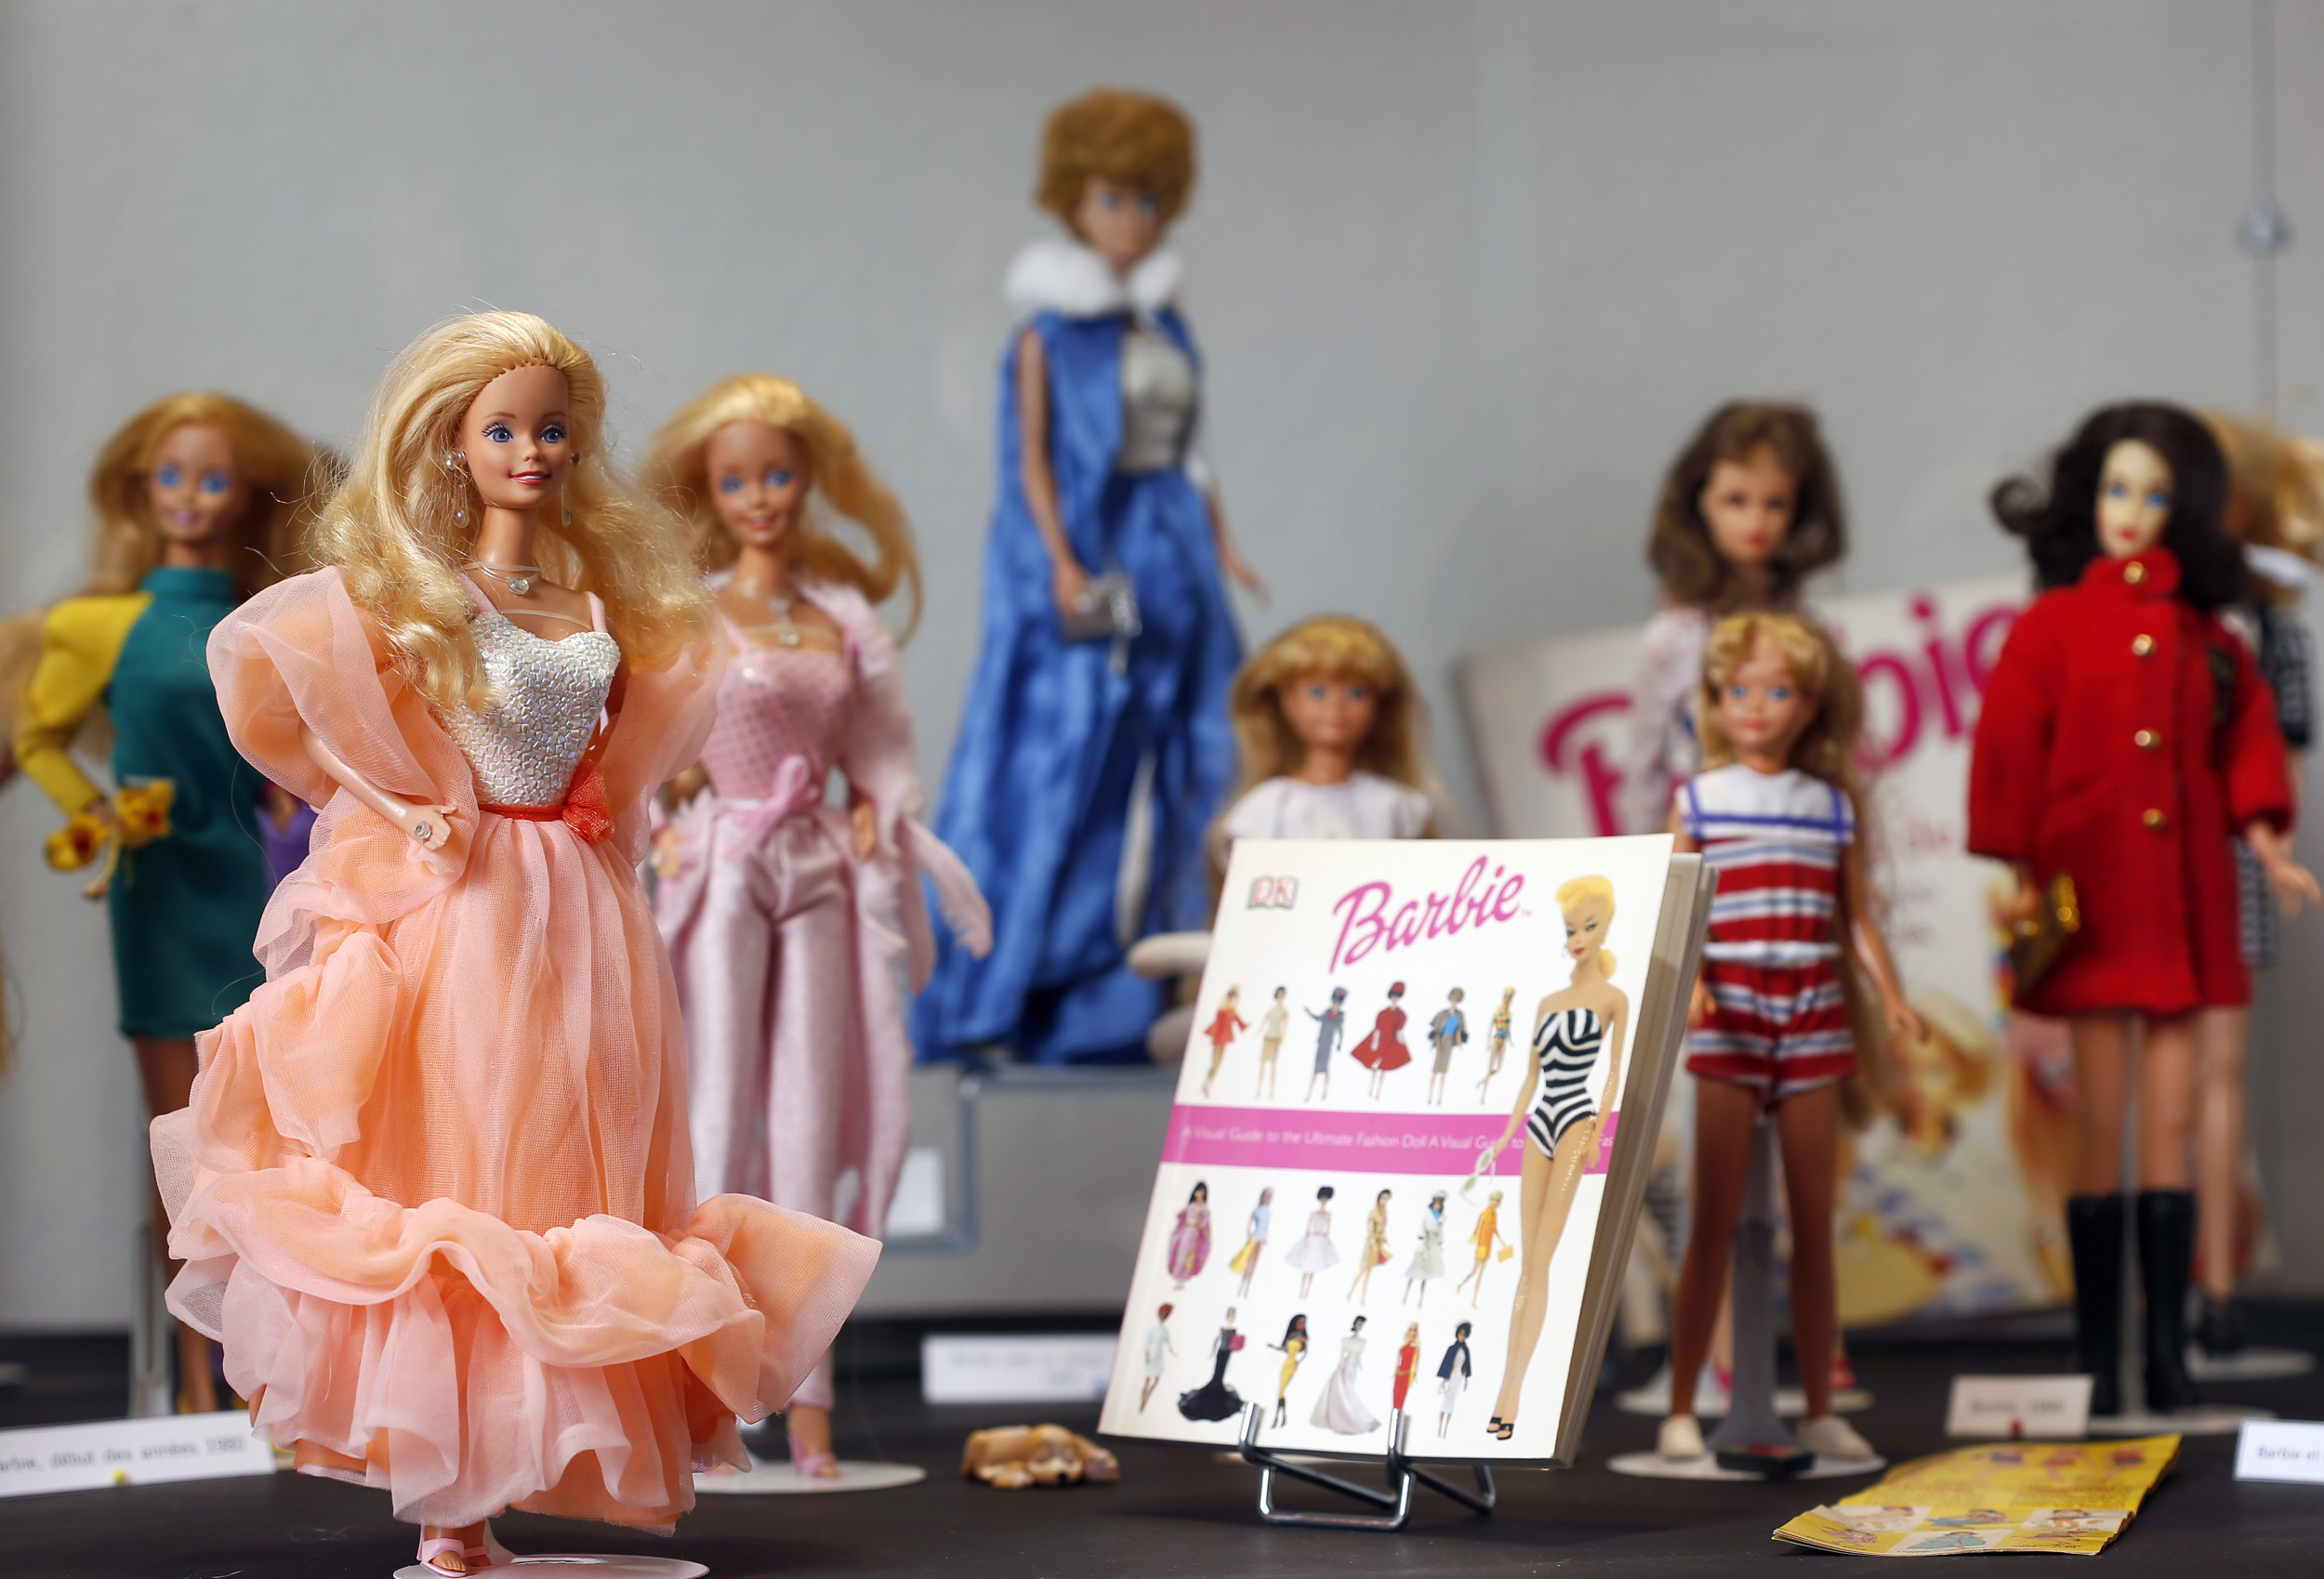 Auschwitz Themed Barbie Exhibit Features Dolls Being Marched Into